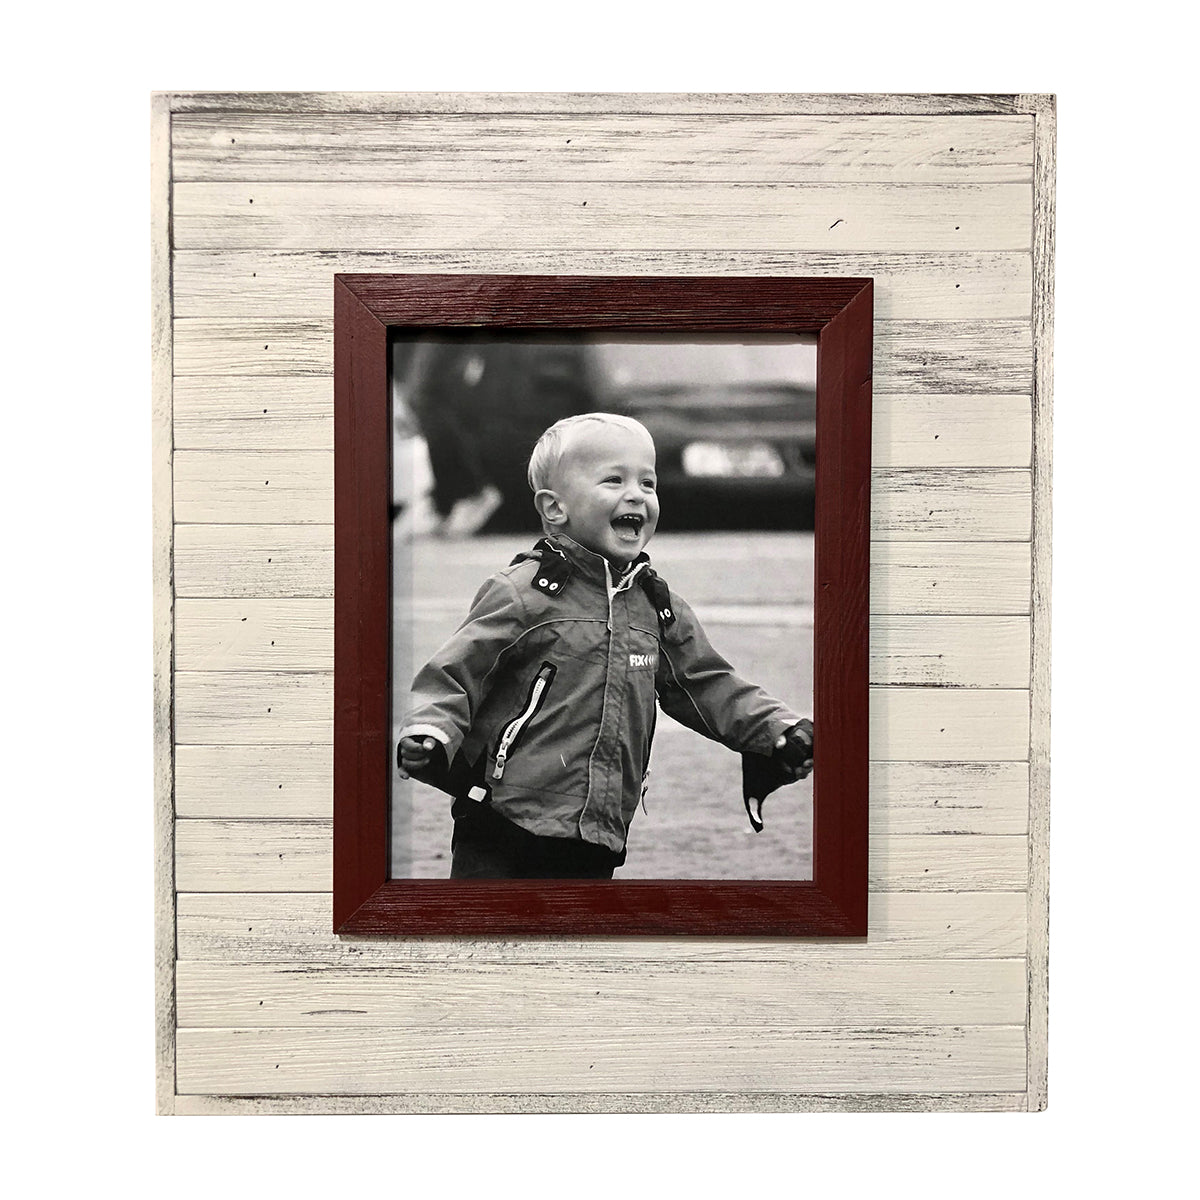 Raised Frame on Reclaimed Wood, Barn Red on White Paint, 25" x 22" - Rustic Red Door Co.